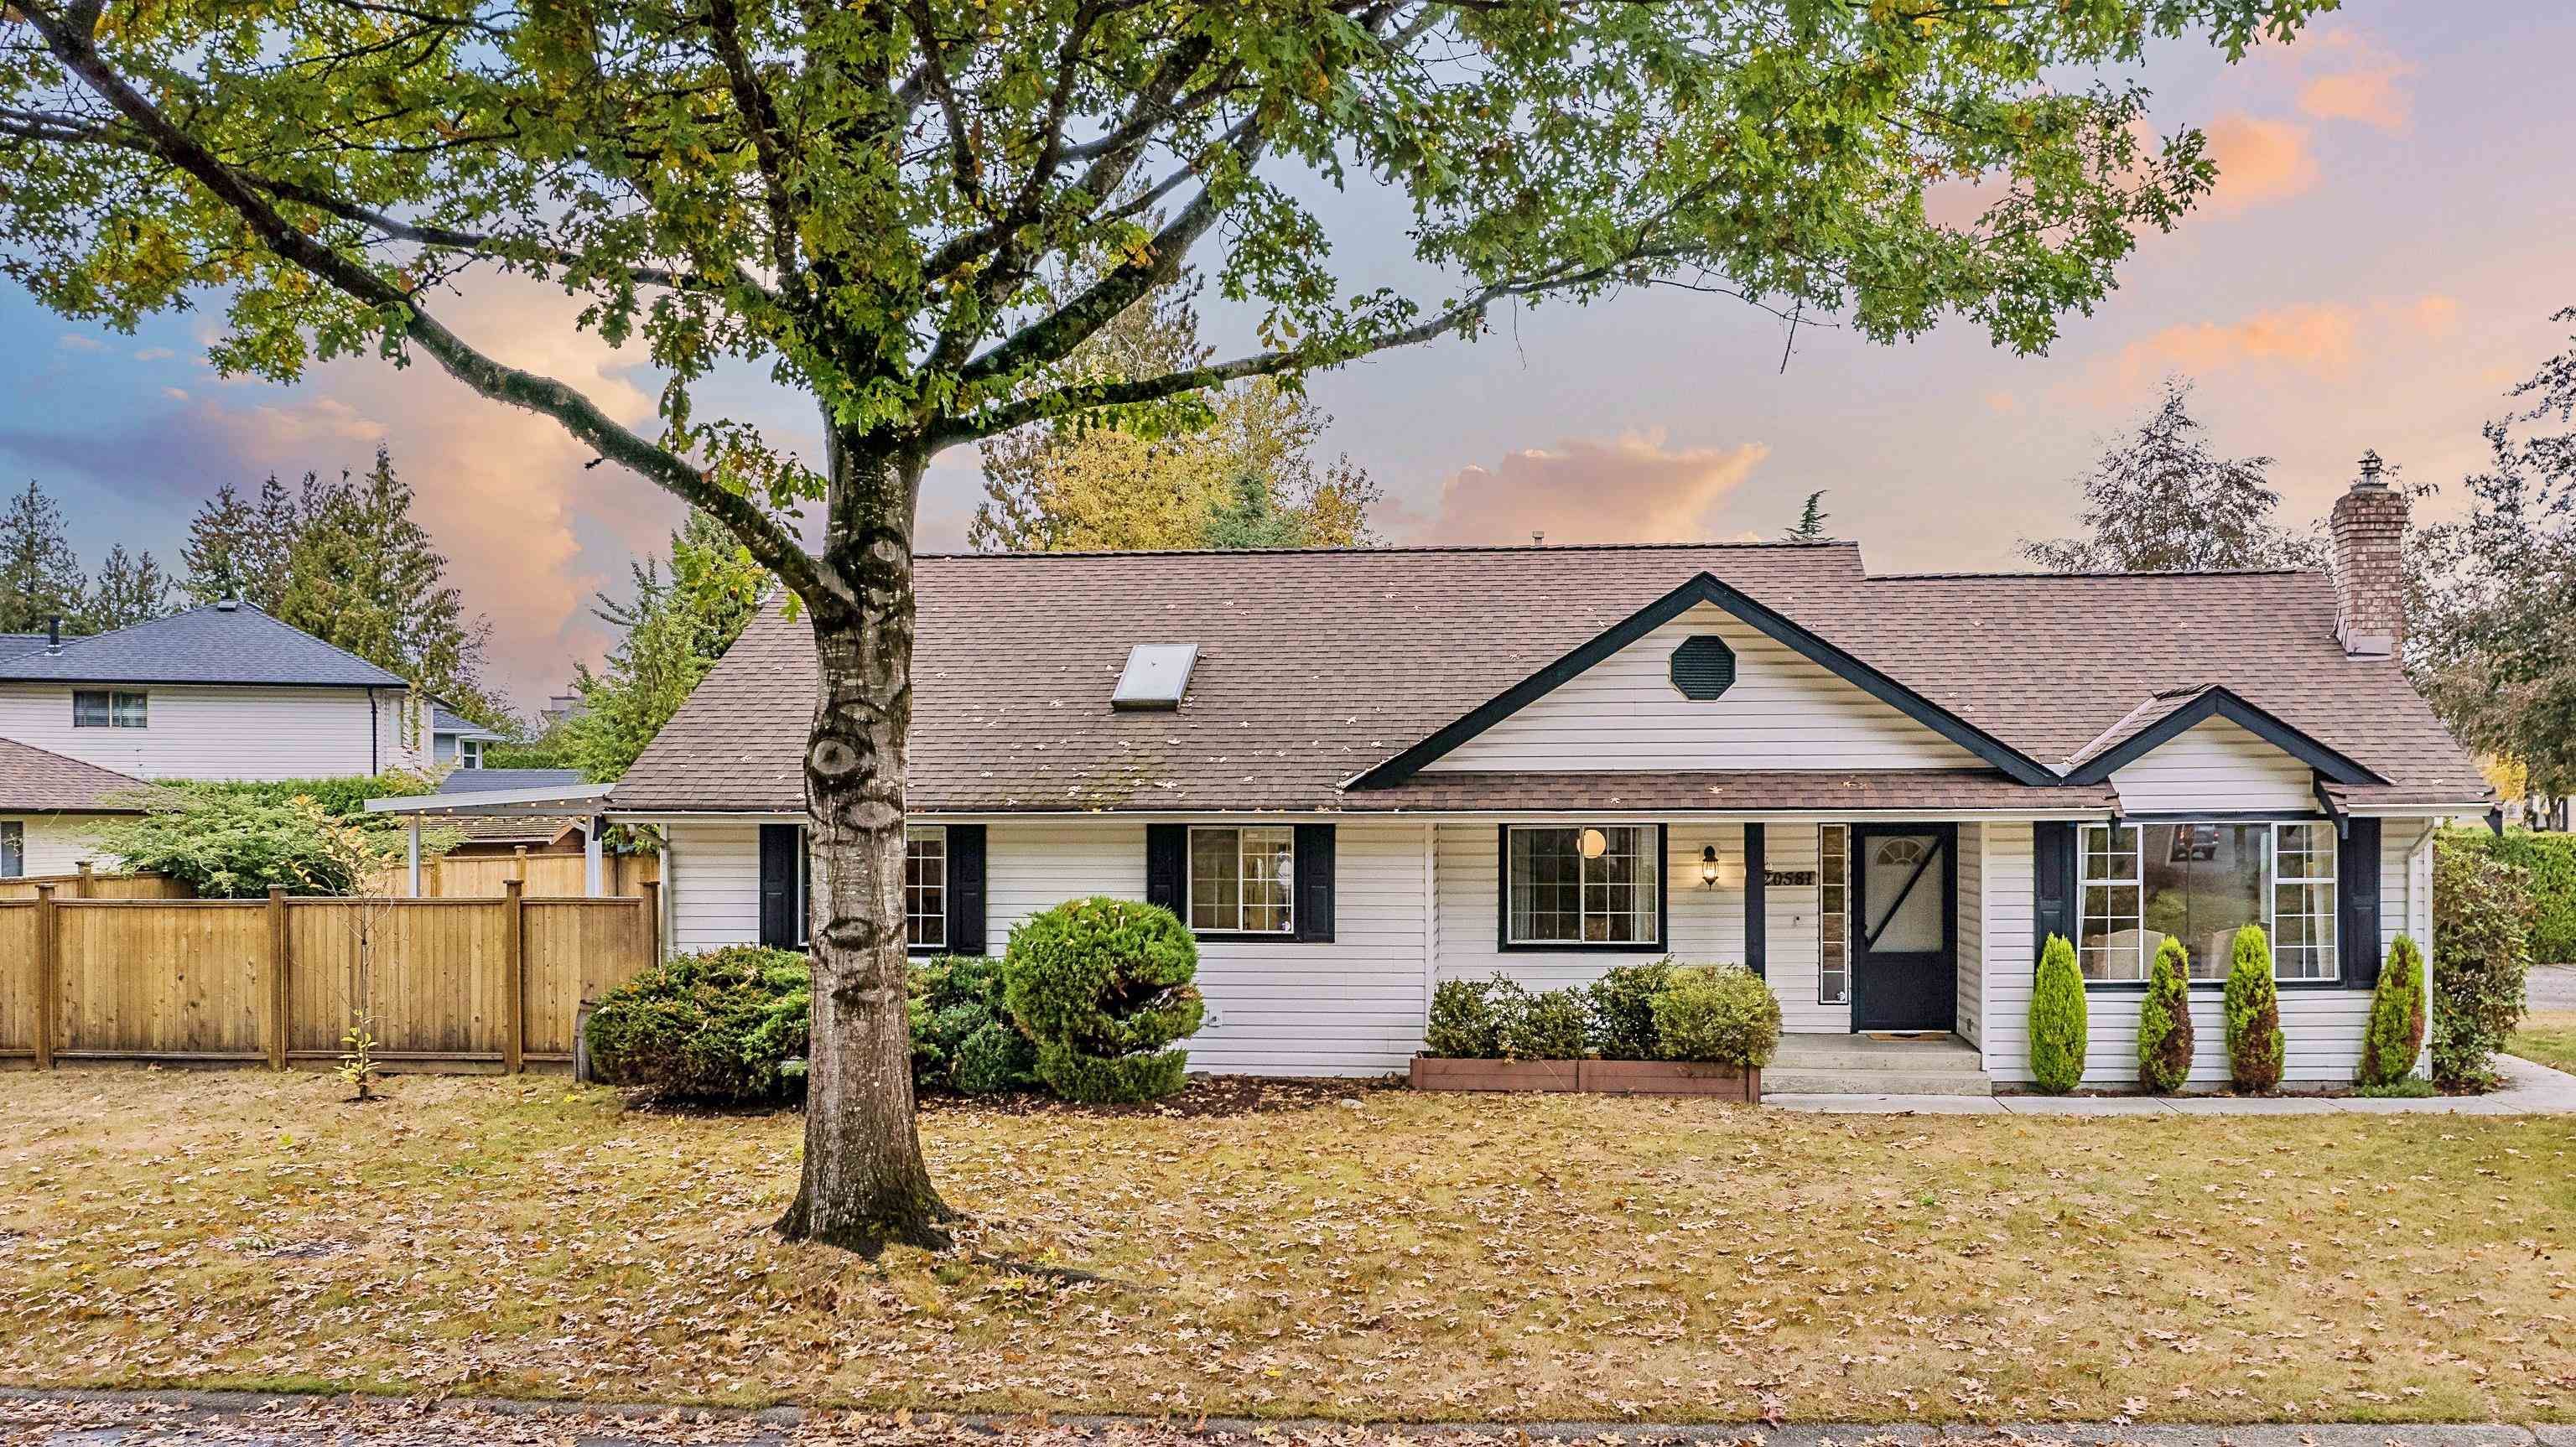 Hot new listing! Just listed in Walnut Grove, Langley